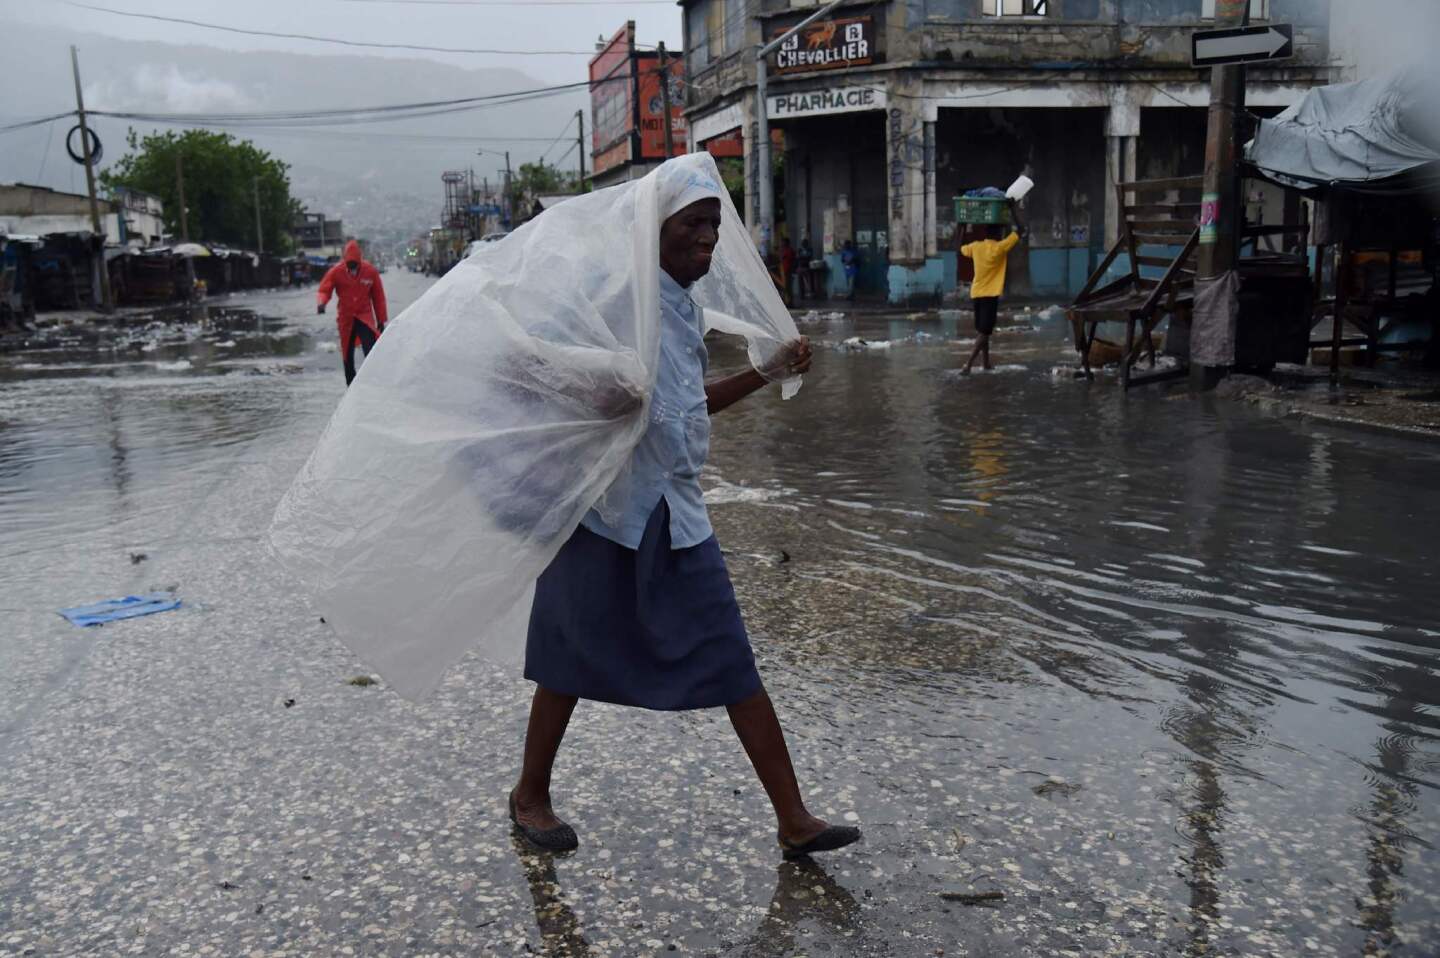 A woman protects herself from the rain in Port-au-Prince as Hurricane Matthew makes landfall in southwestern Haiti early Tuesday.